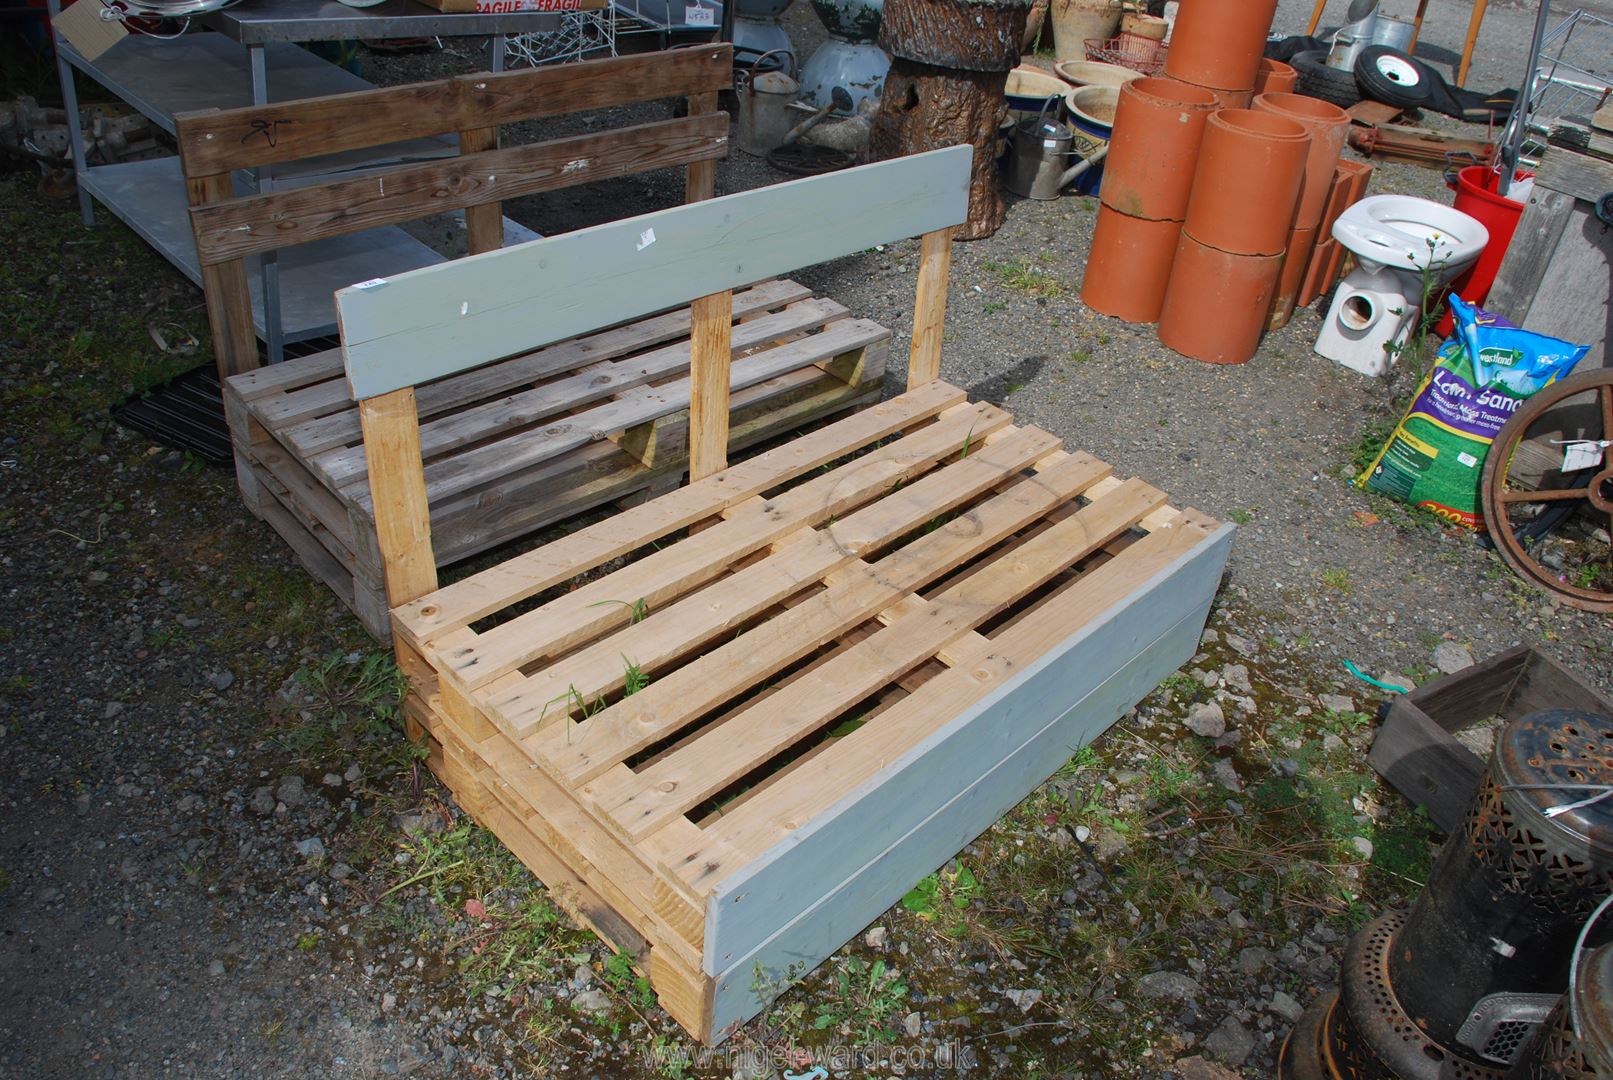 Two home-made pallet benches, 47'' wide x 21'' deep.